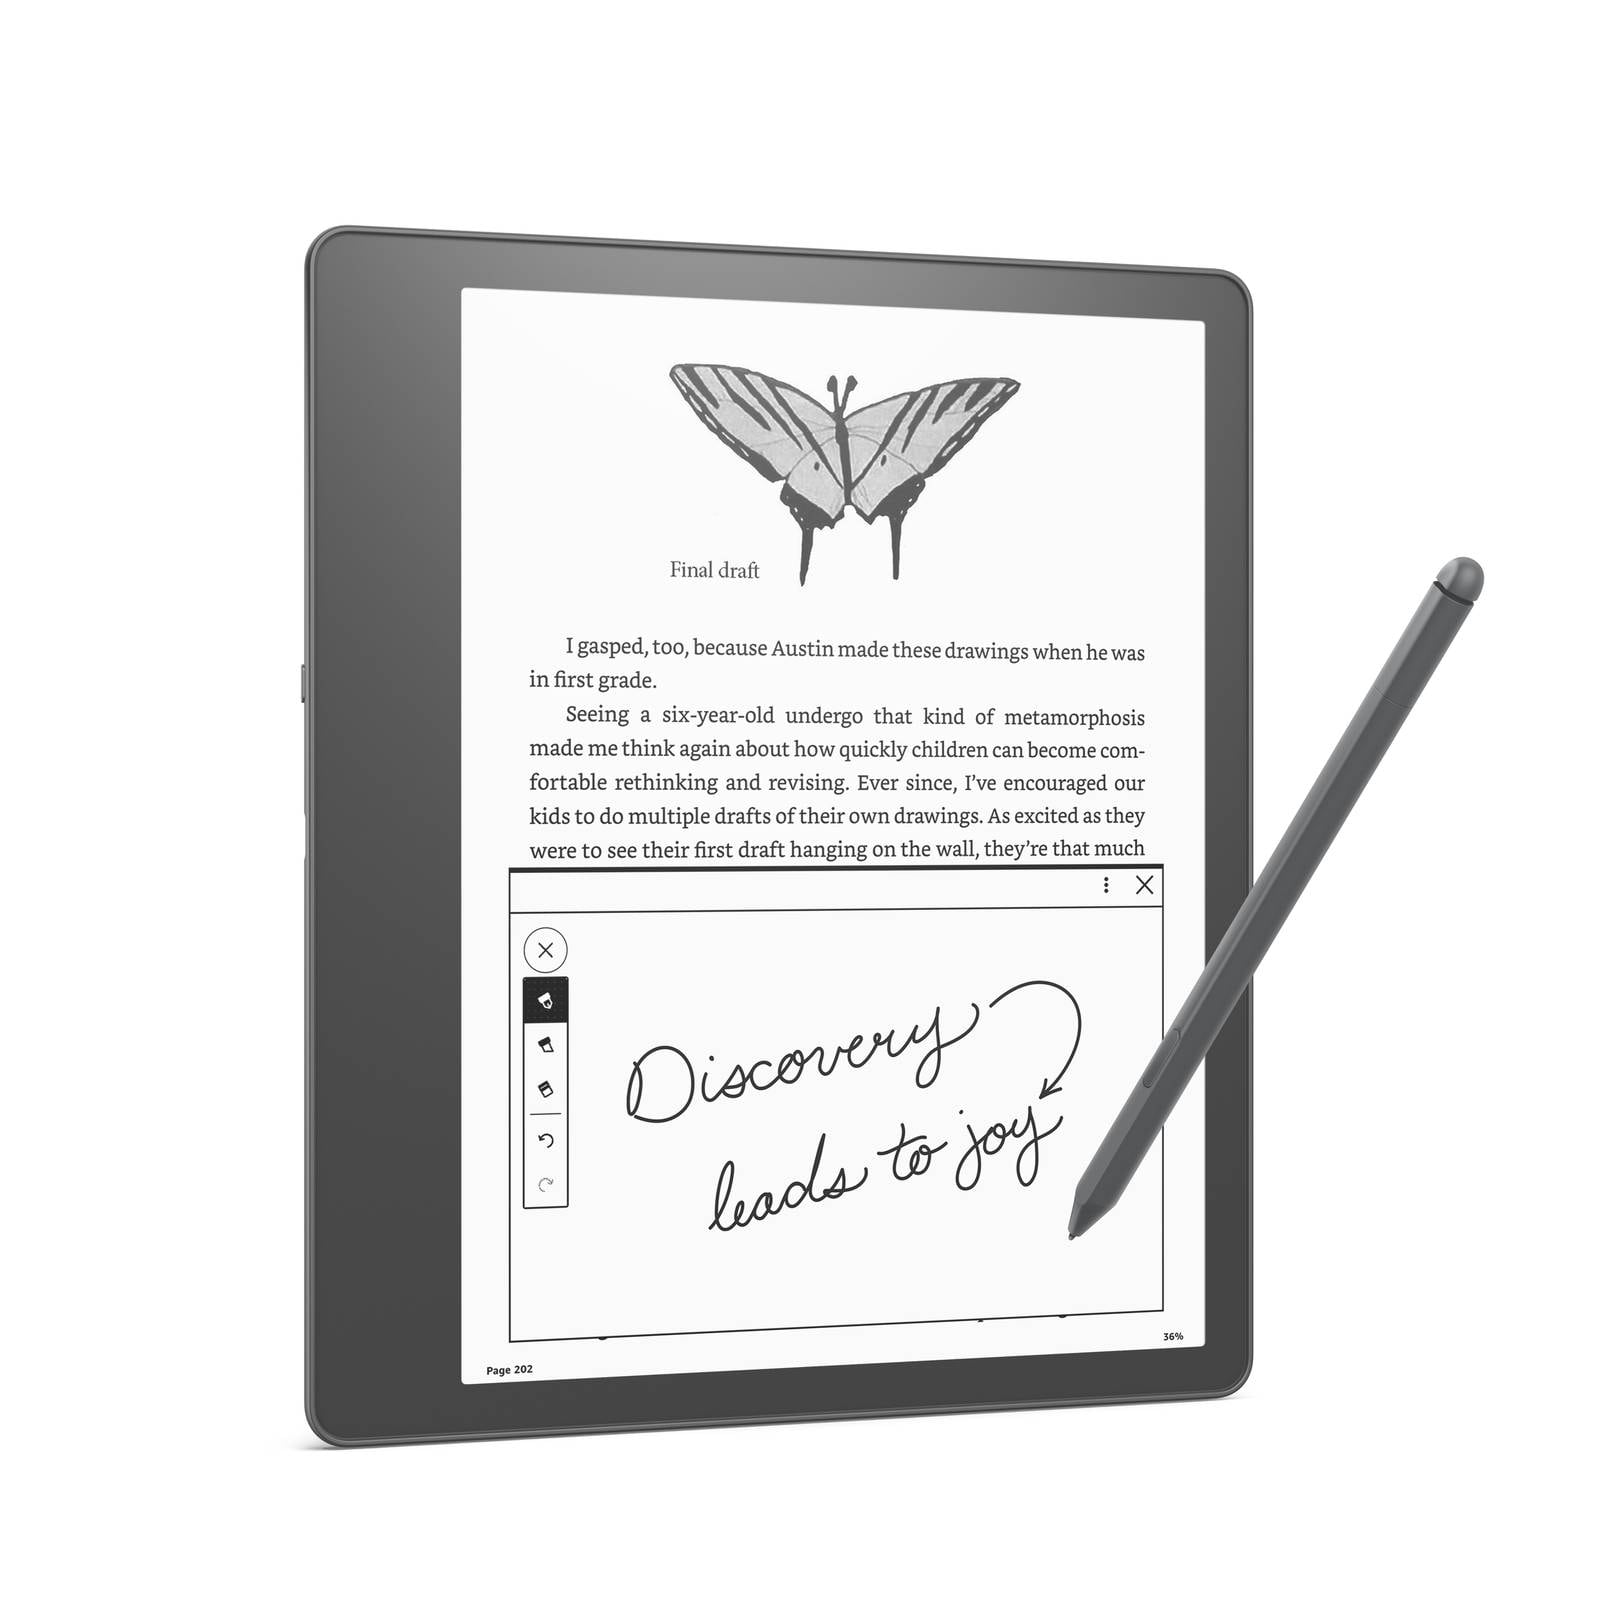 Kindle e reader with a digital pen